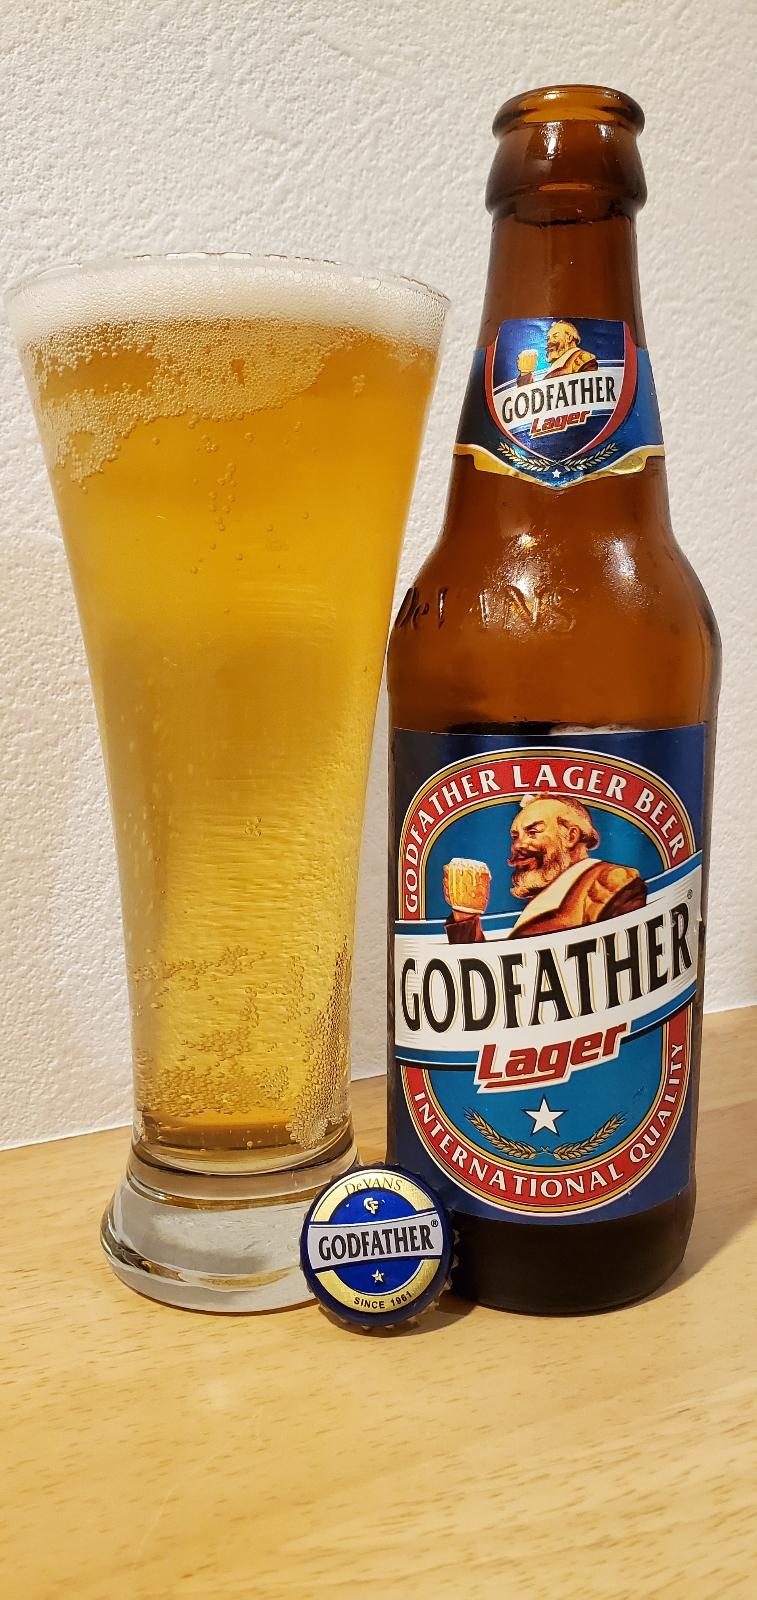 Godfather Lager